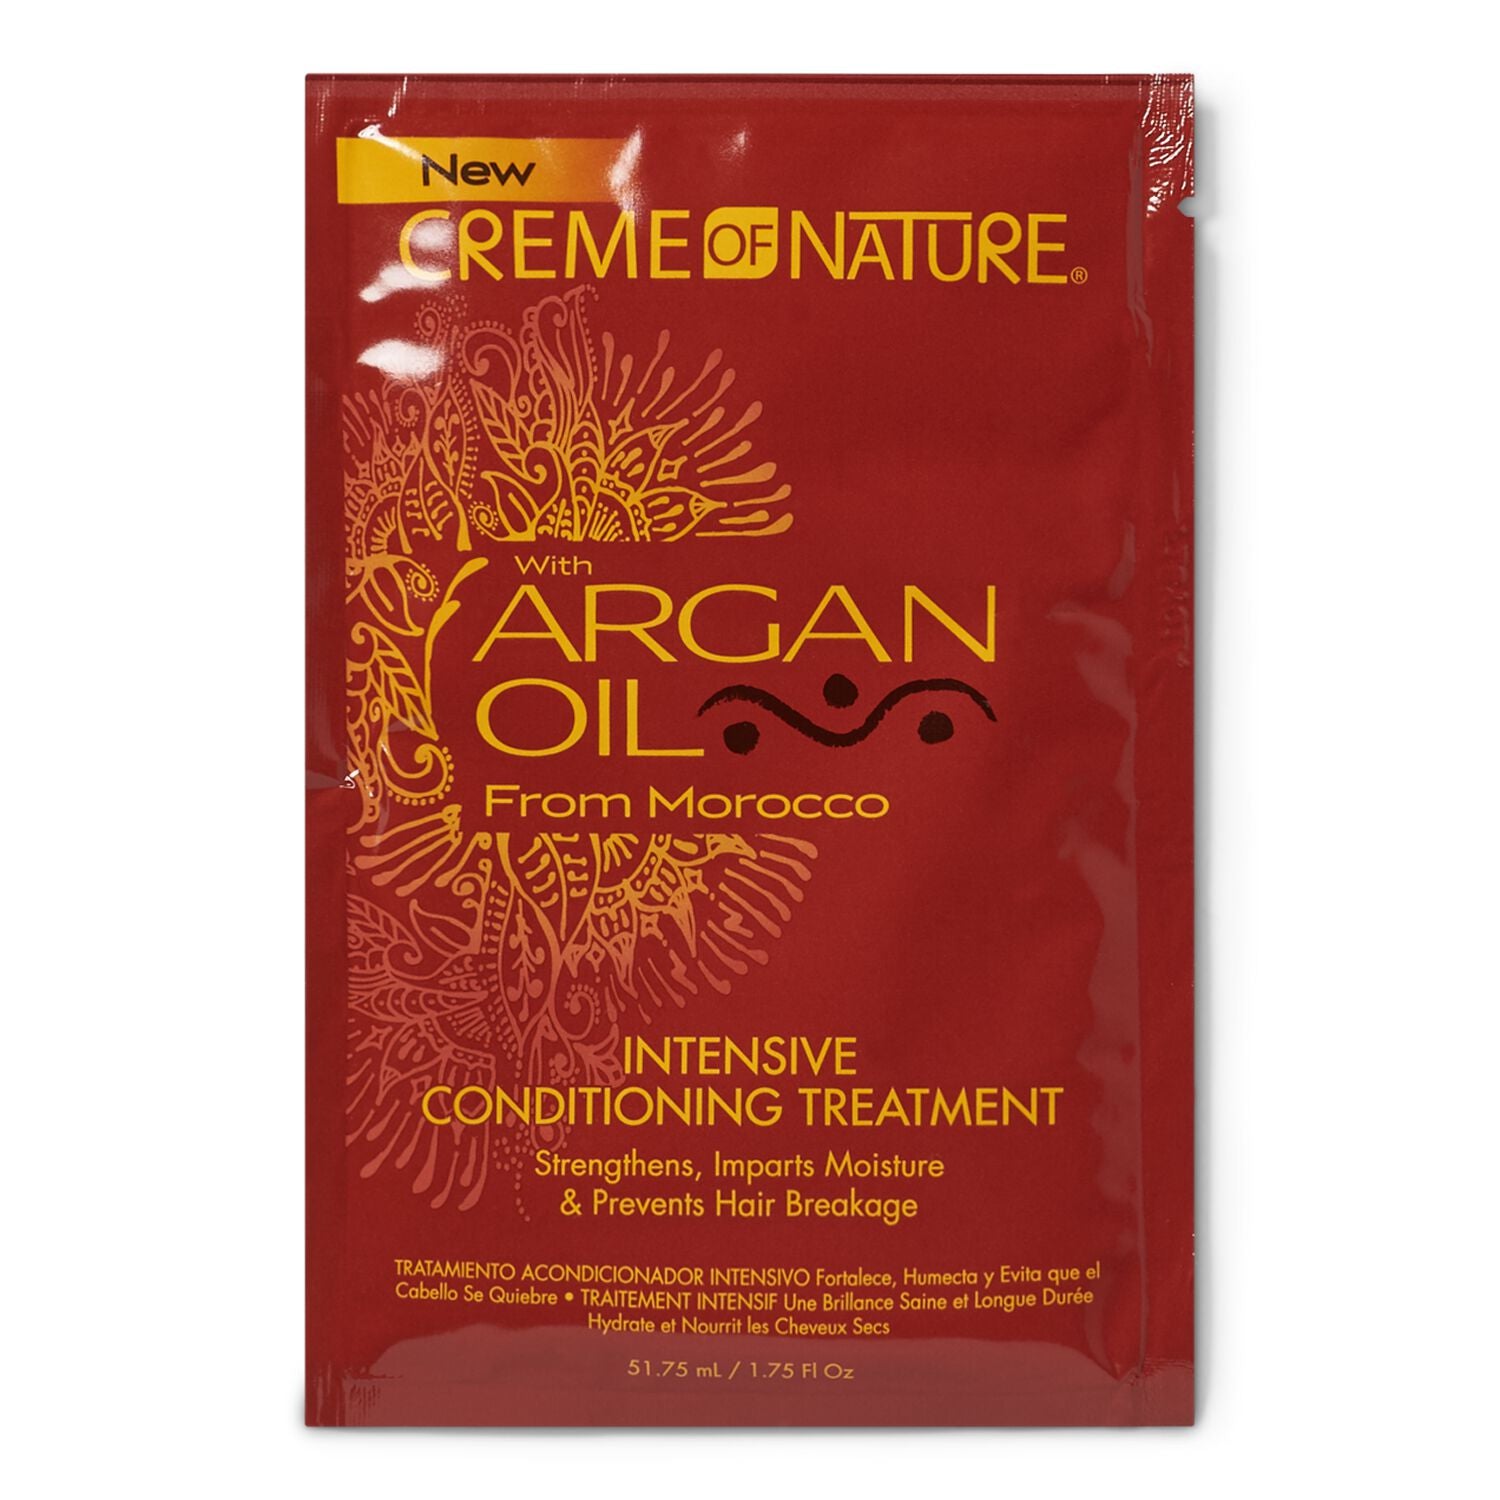 Argan Oil  by   Creme of Nature Argan Oil Intensive Conditioning Treatment Packette